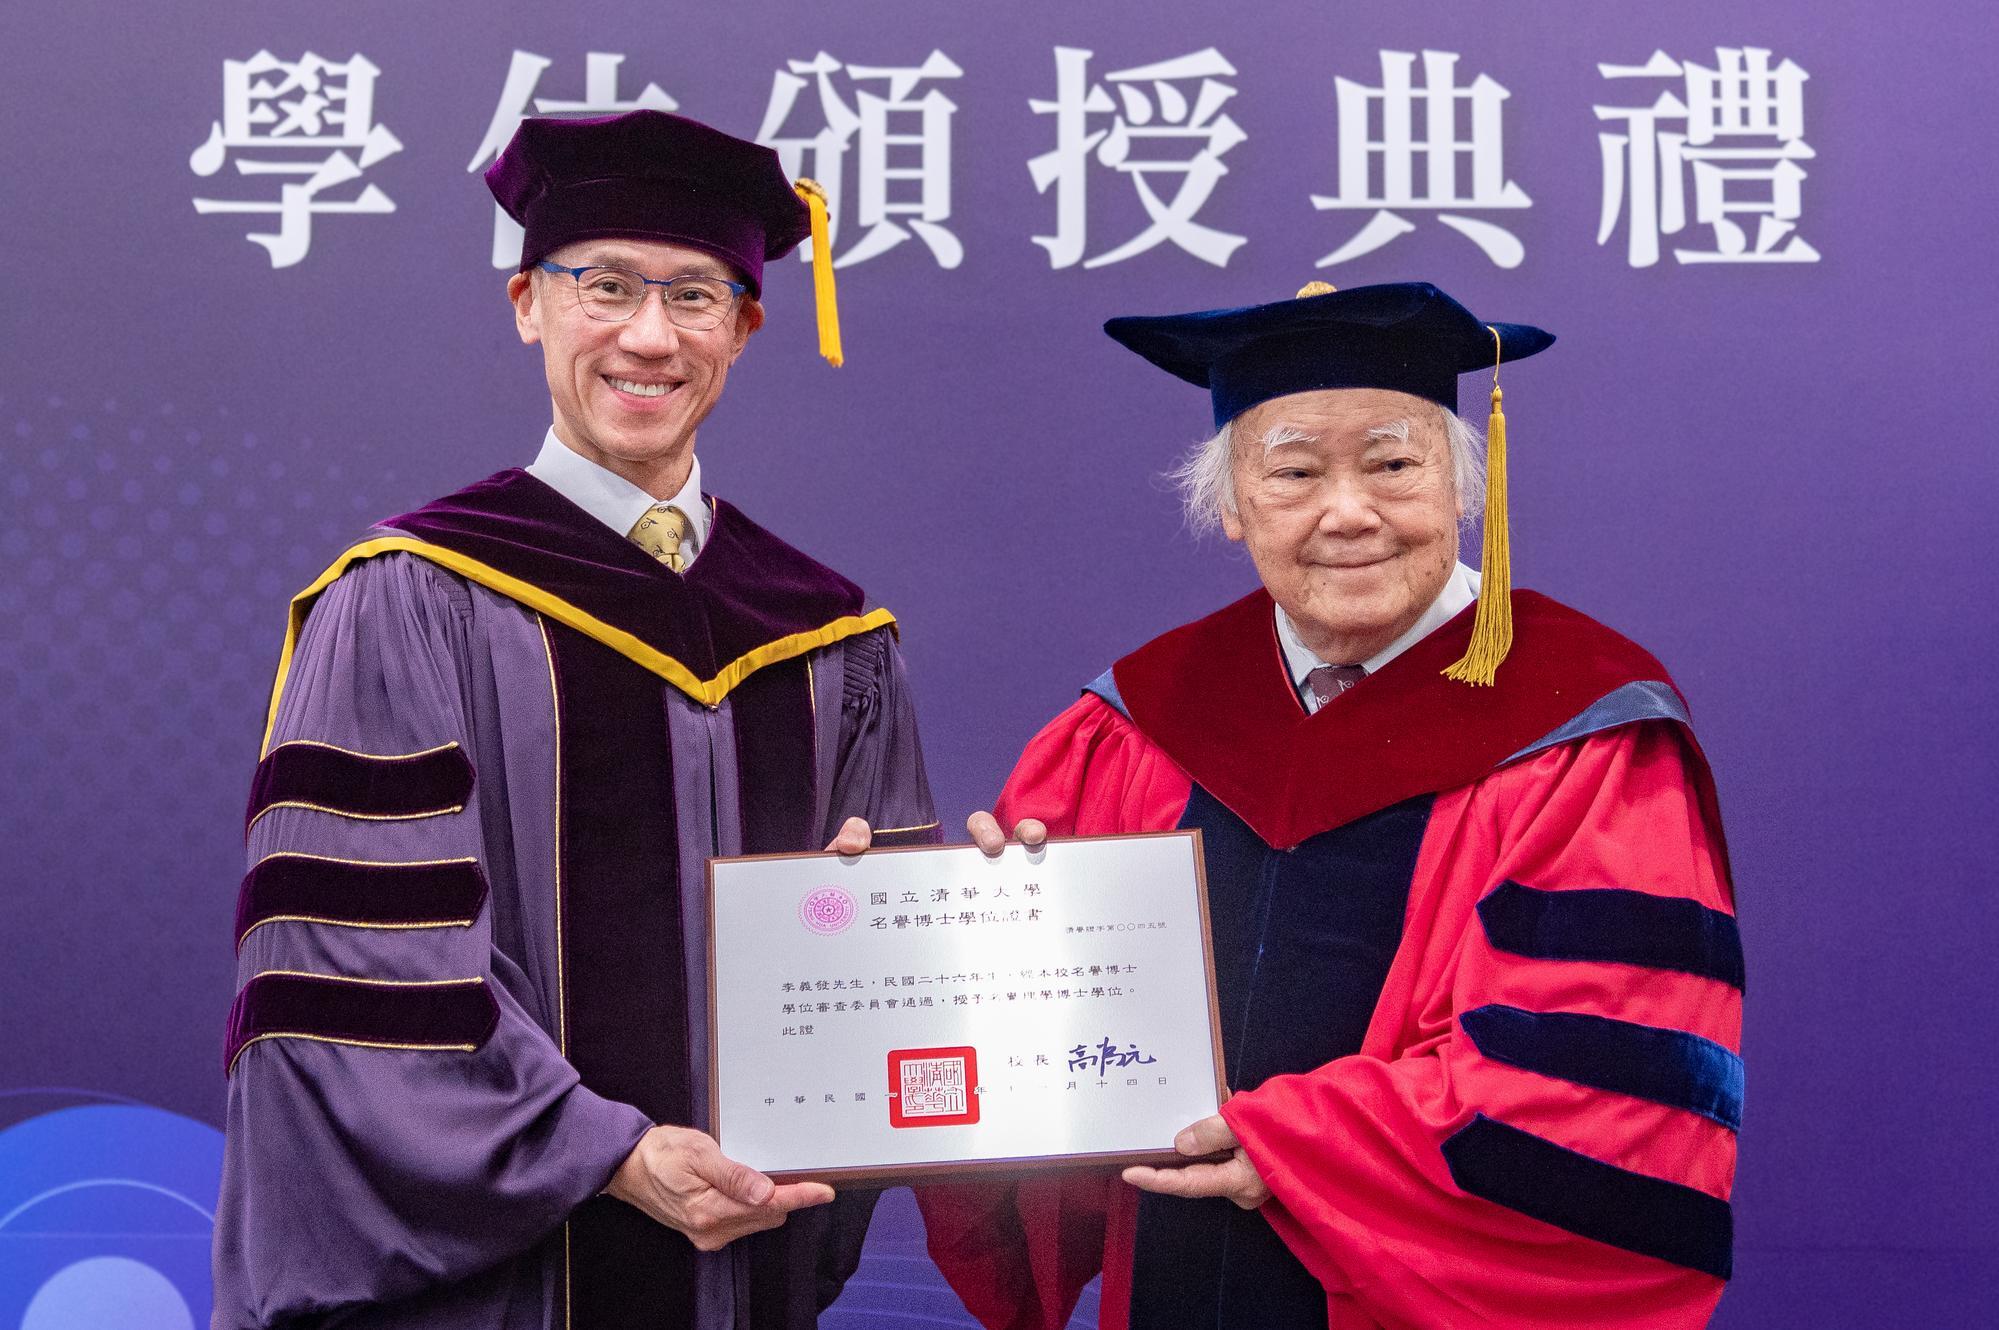 NTHU President W. John Kao (高為元) (left) presenting an honorary doctoral degree to Dr. Yi-Fa Lee (李義發) for his selfless contributions to society and his alma mater.